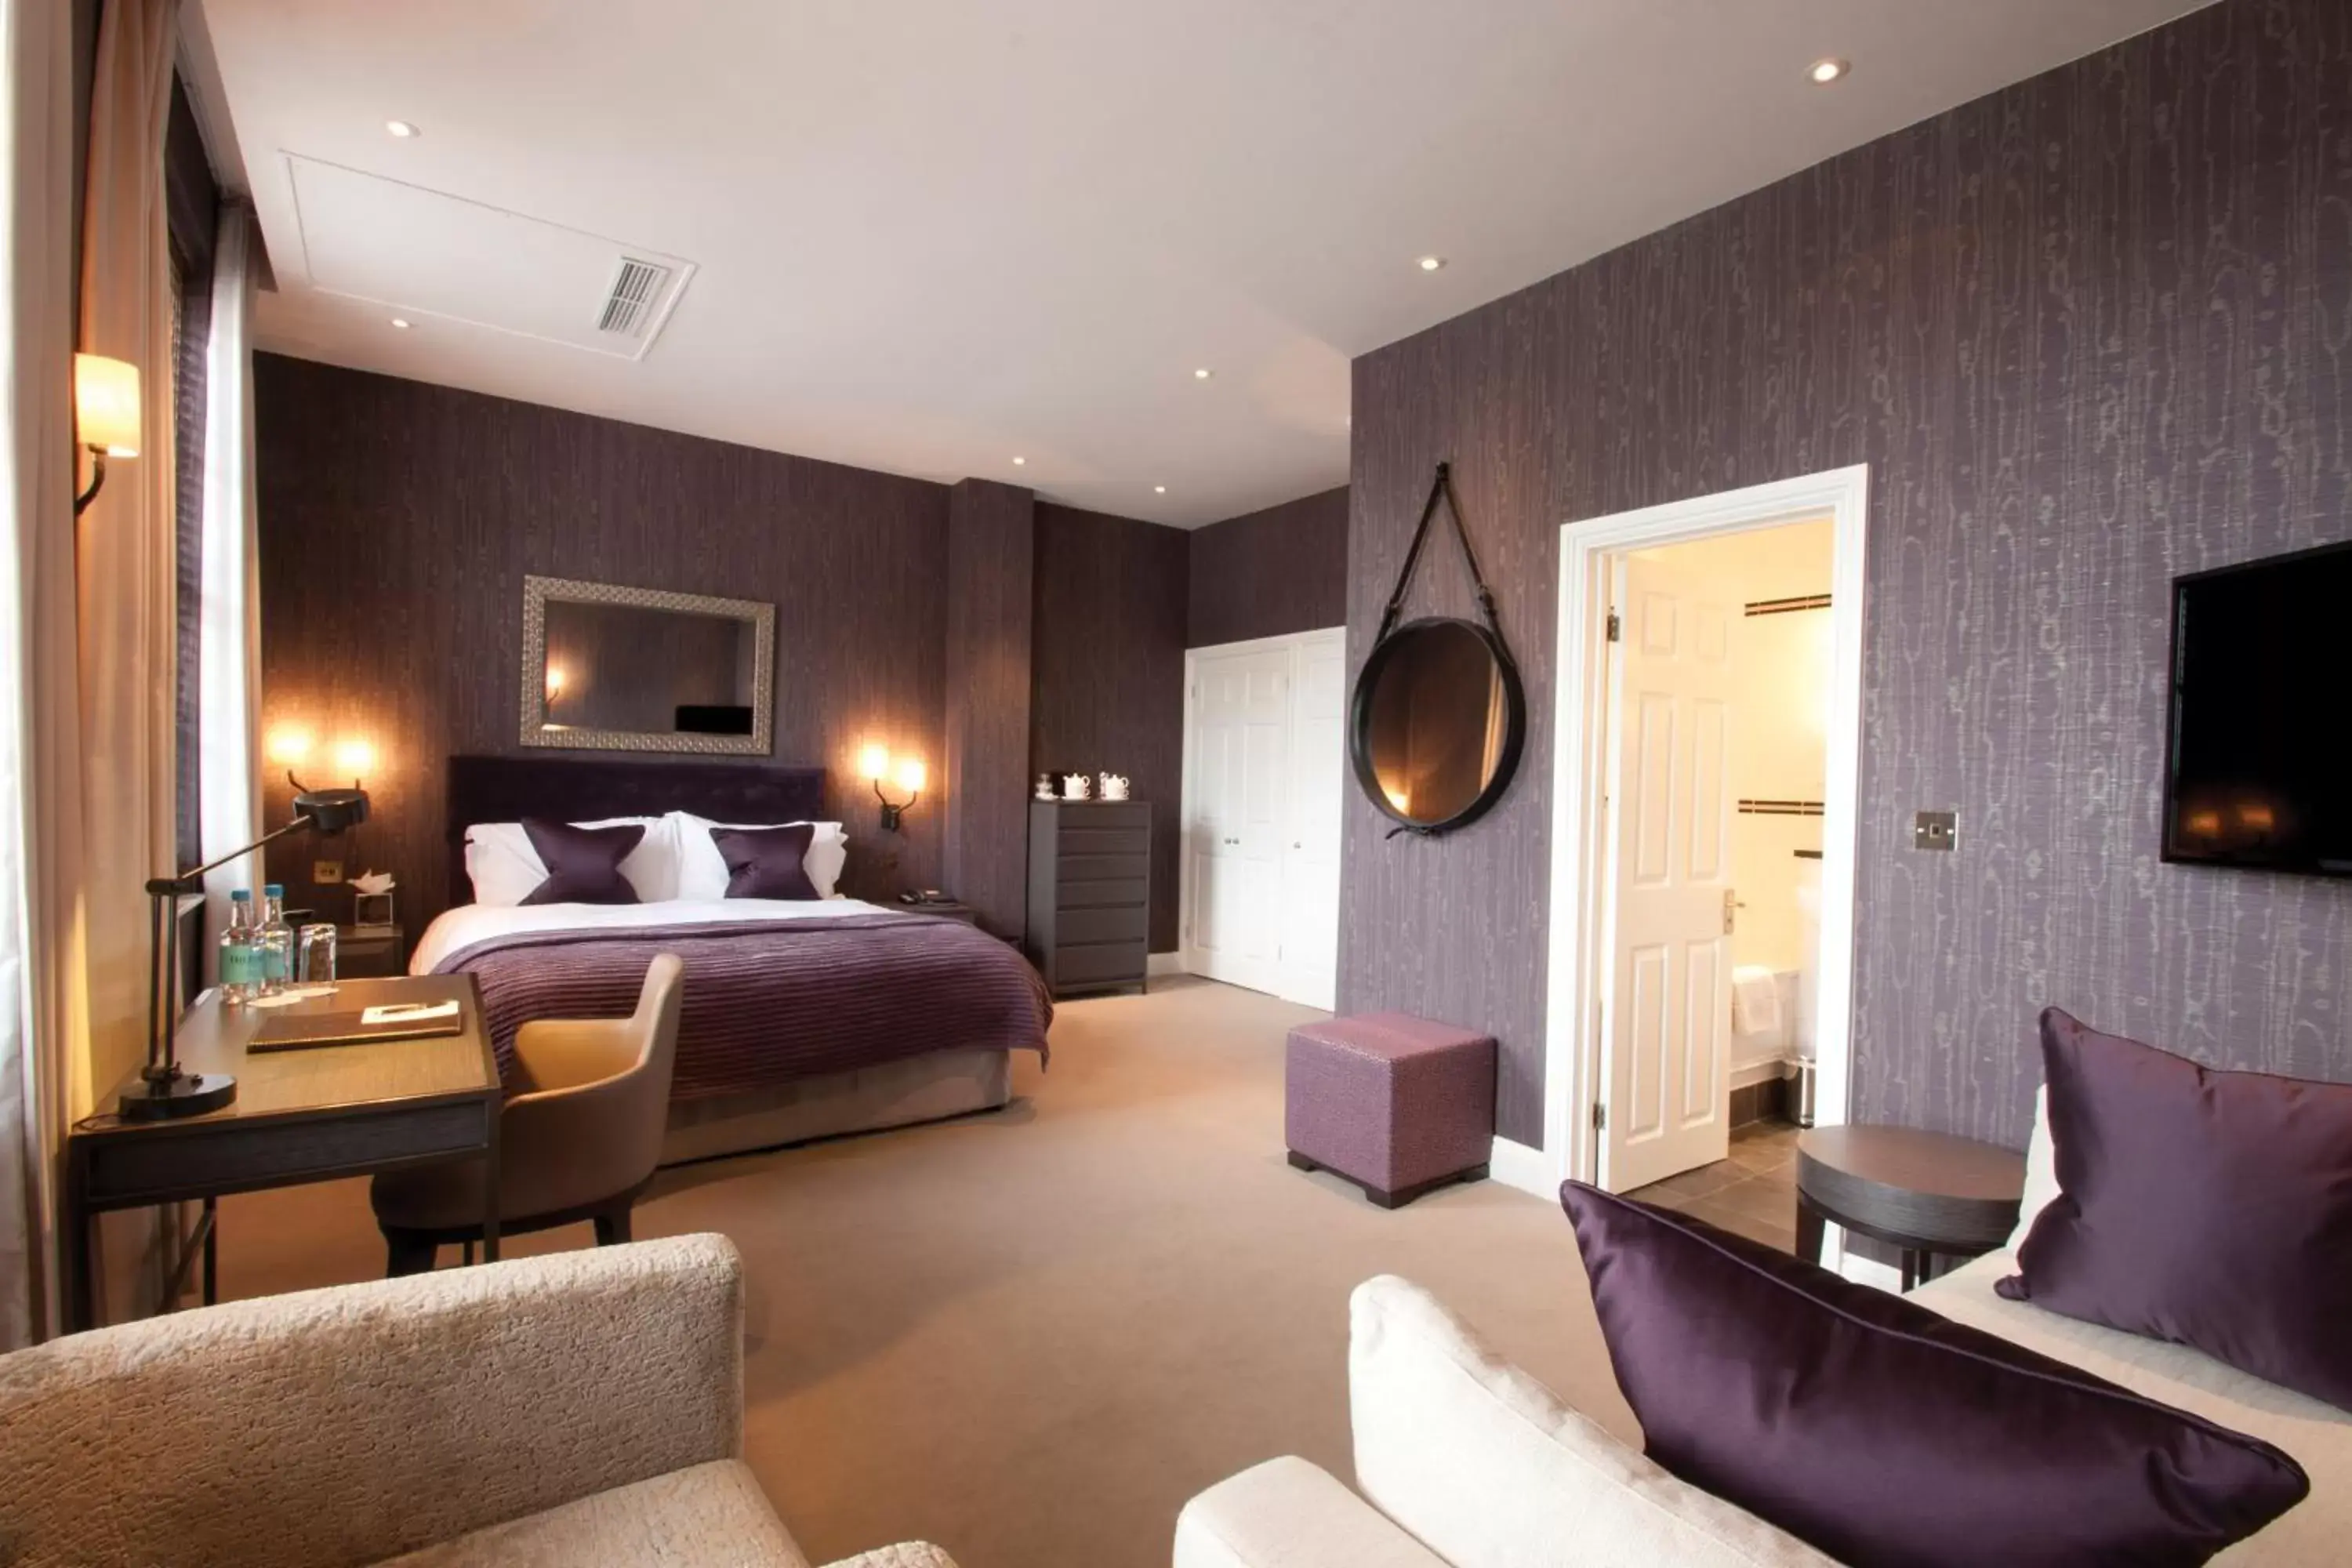 Bedroom in St Michael's Manor Hotel - St Albans